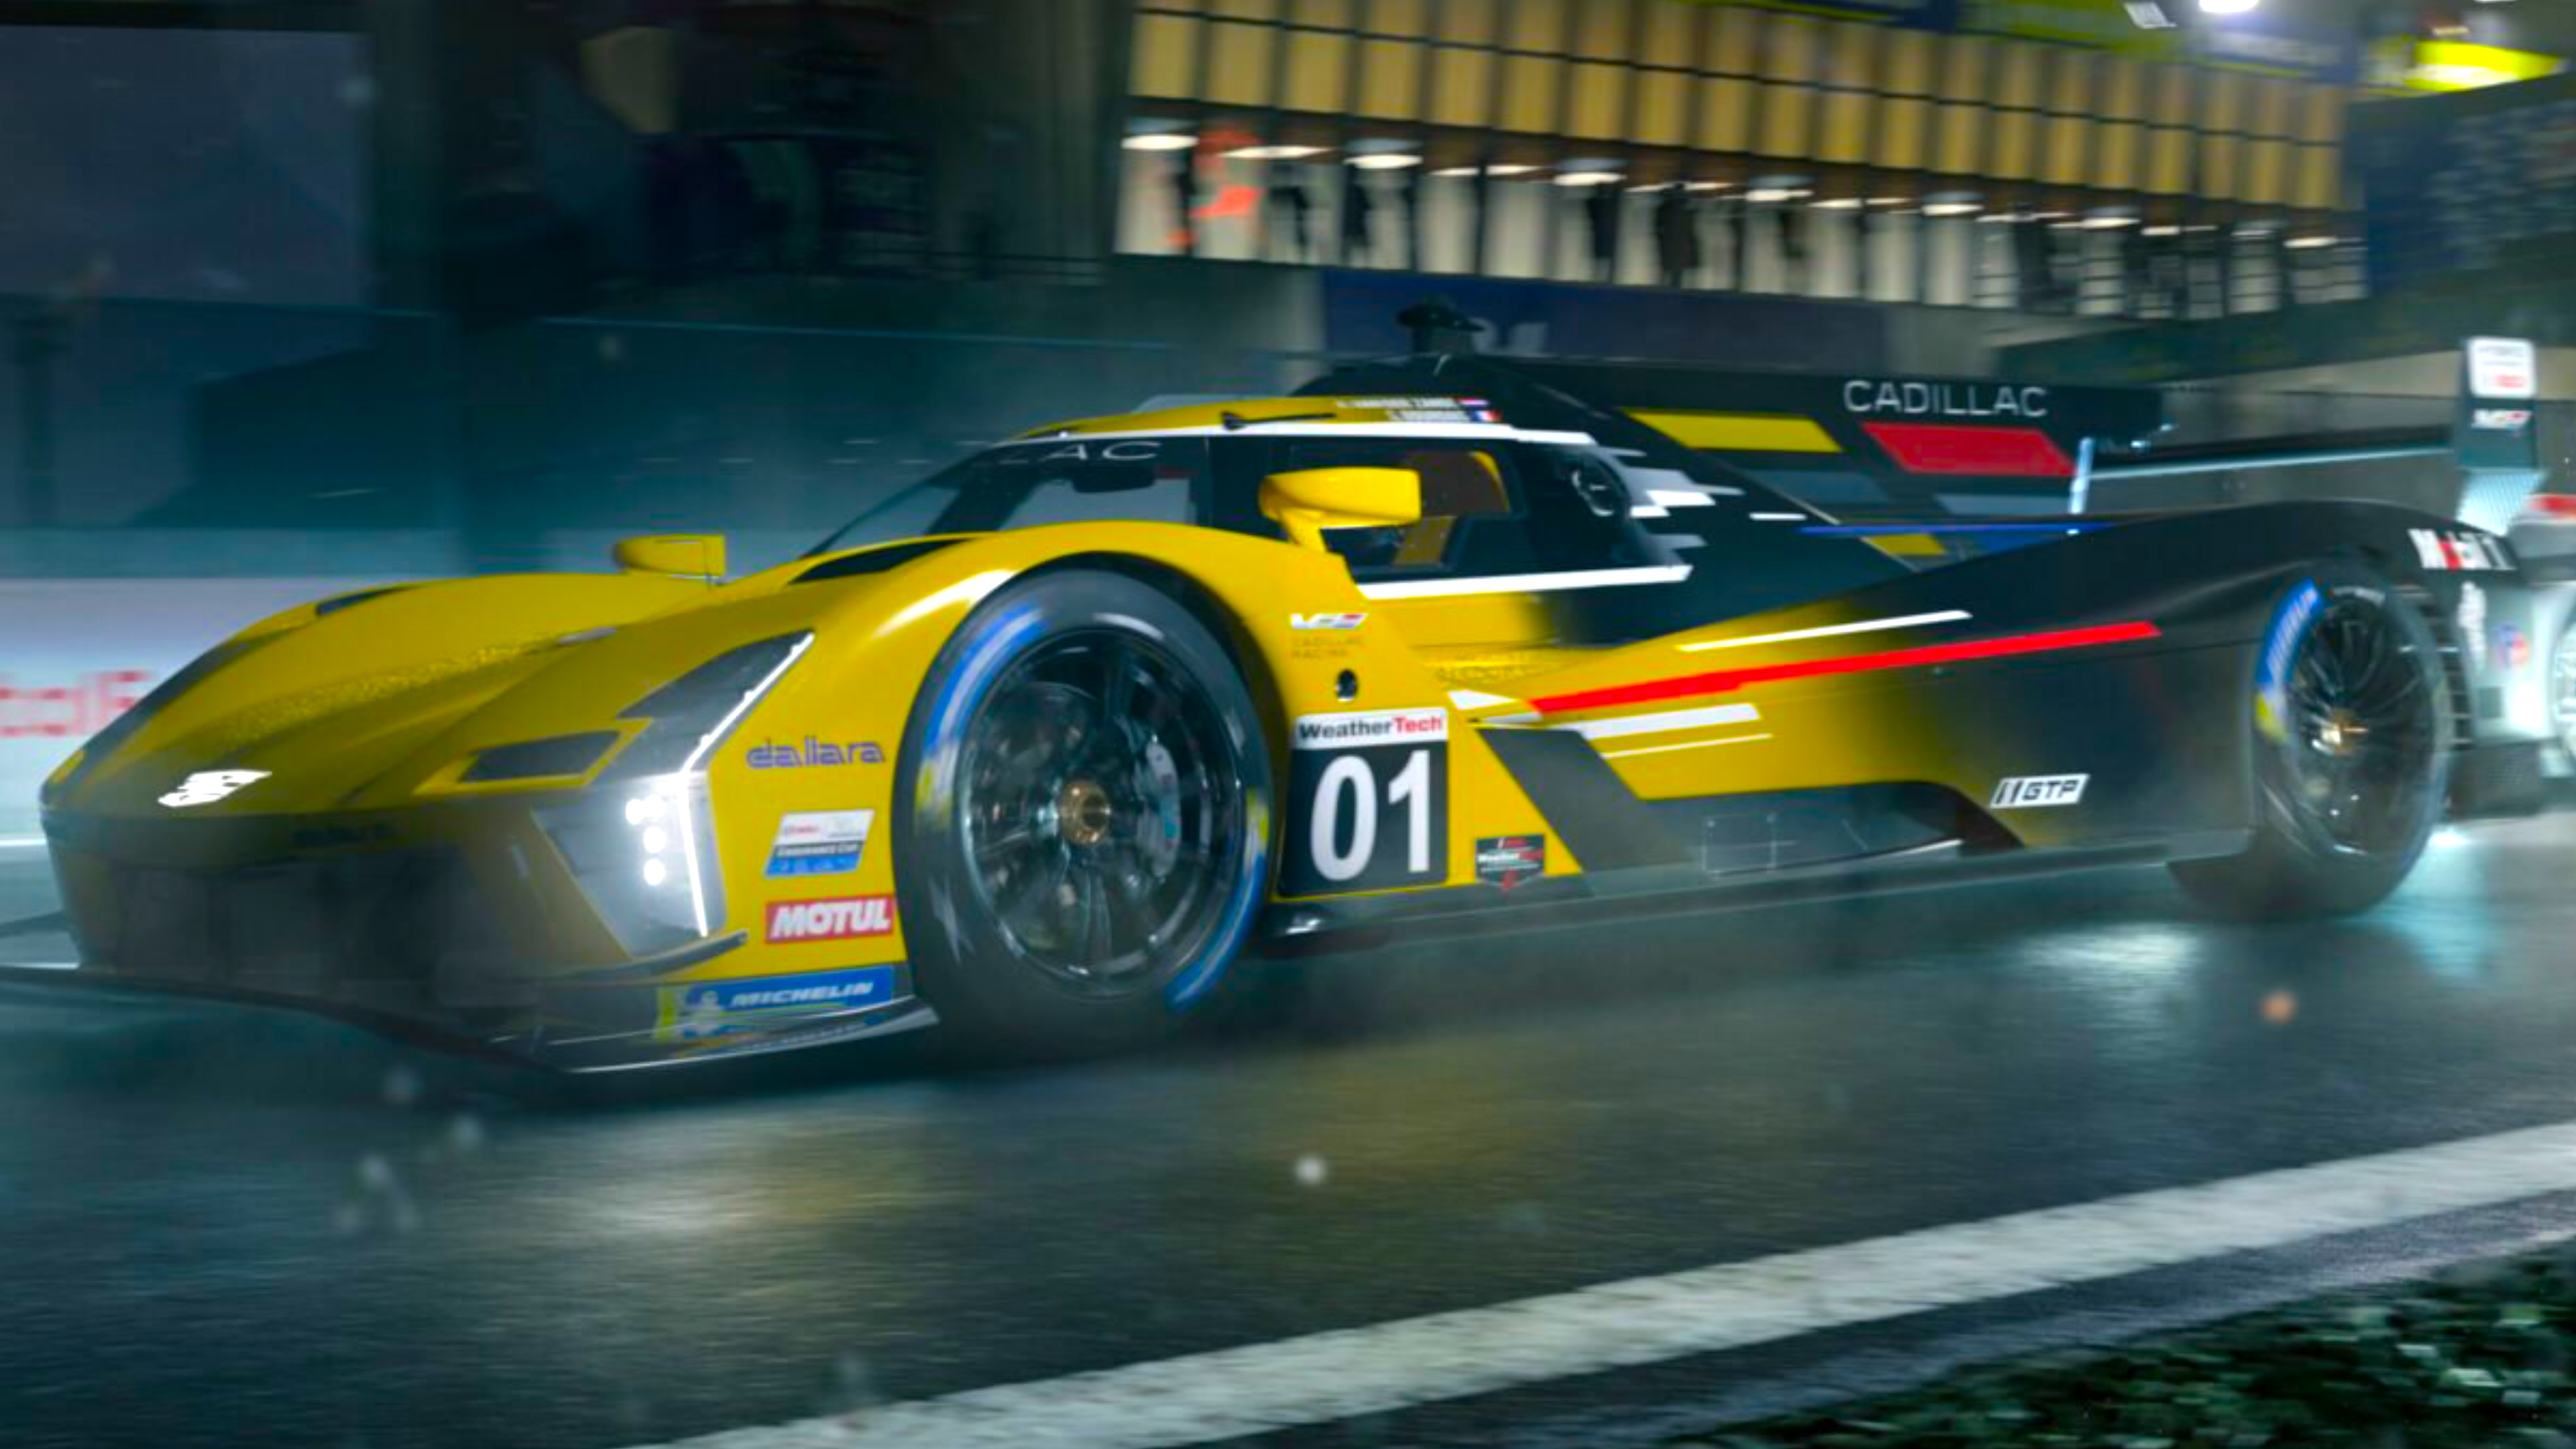 Forza Motorsport Metacritic Score Revealed After Reviews Go Live